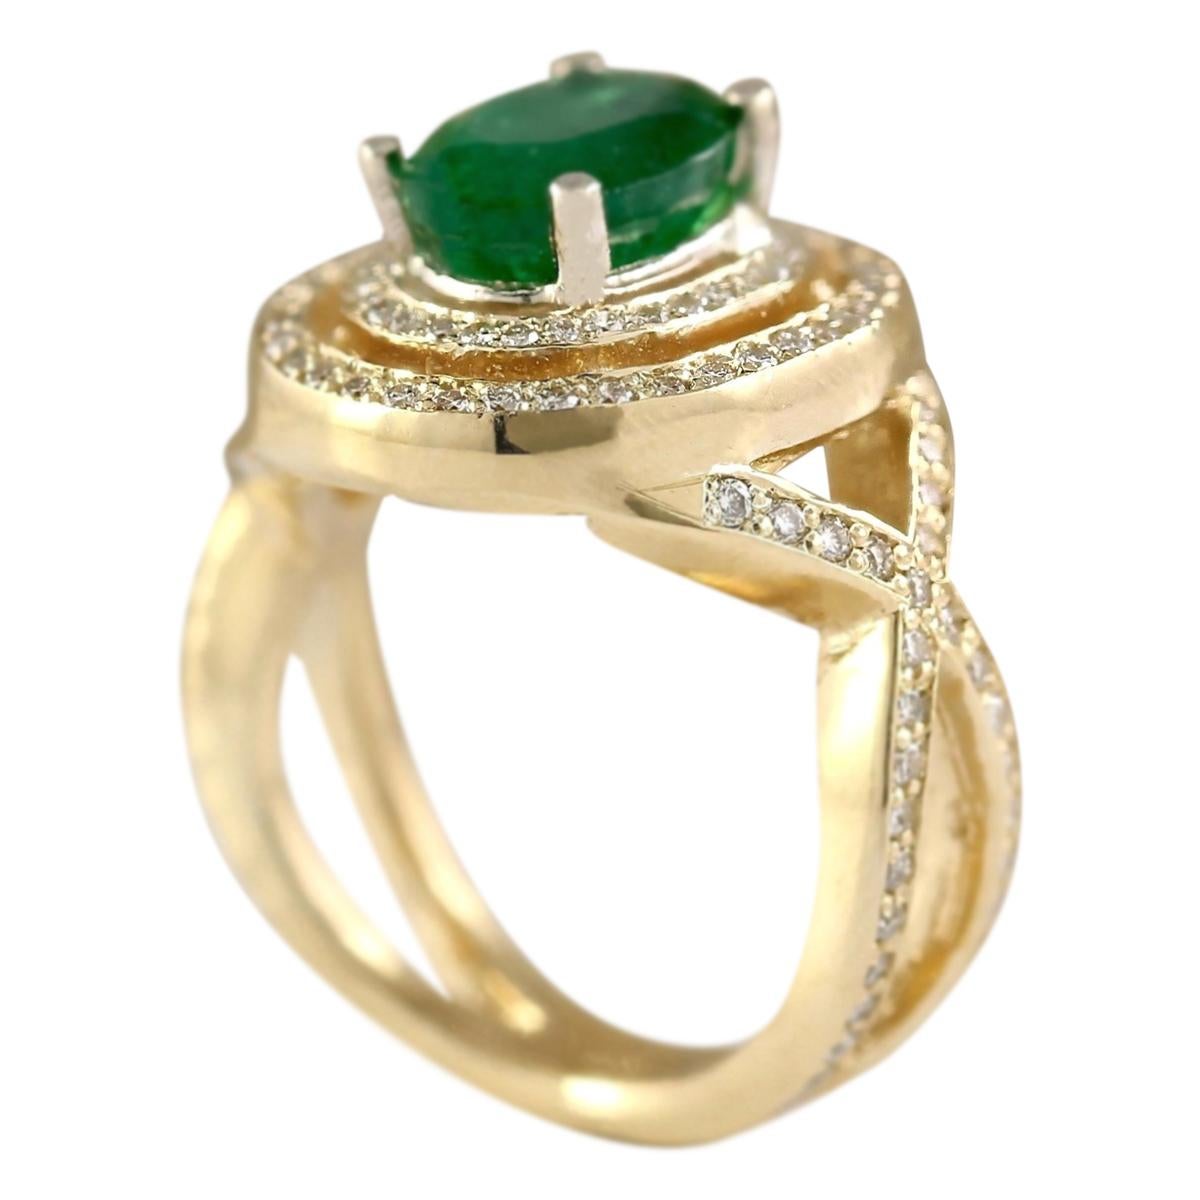 Oval Cut Natural Emerald 14 Karat Yellow Gold Diamond Ring For Sale